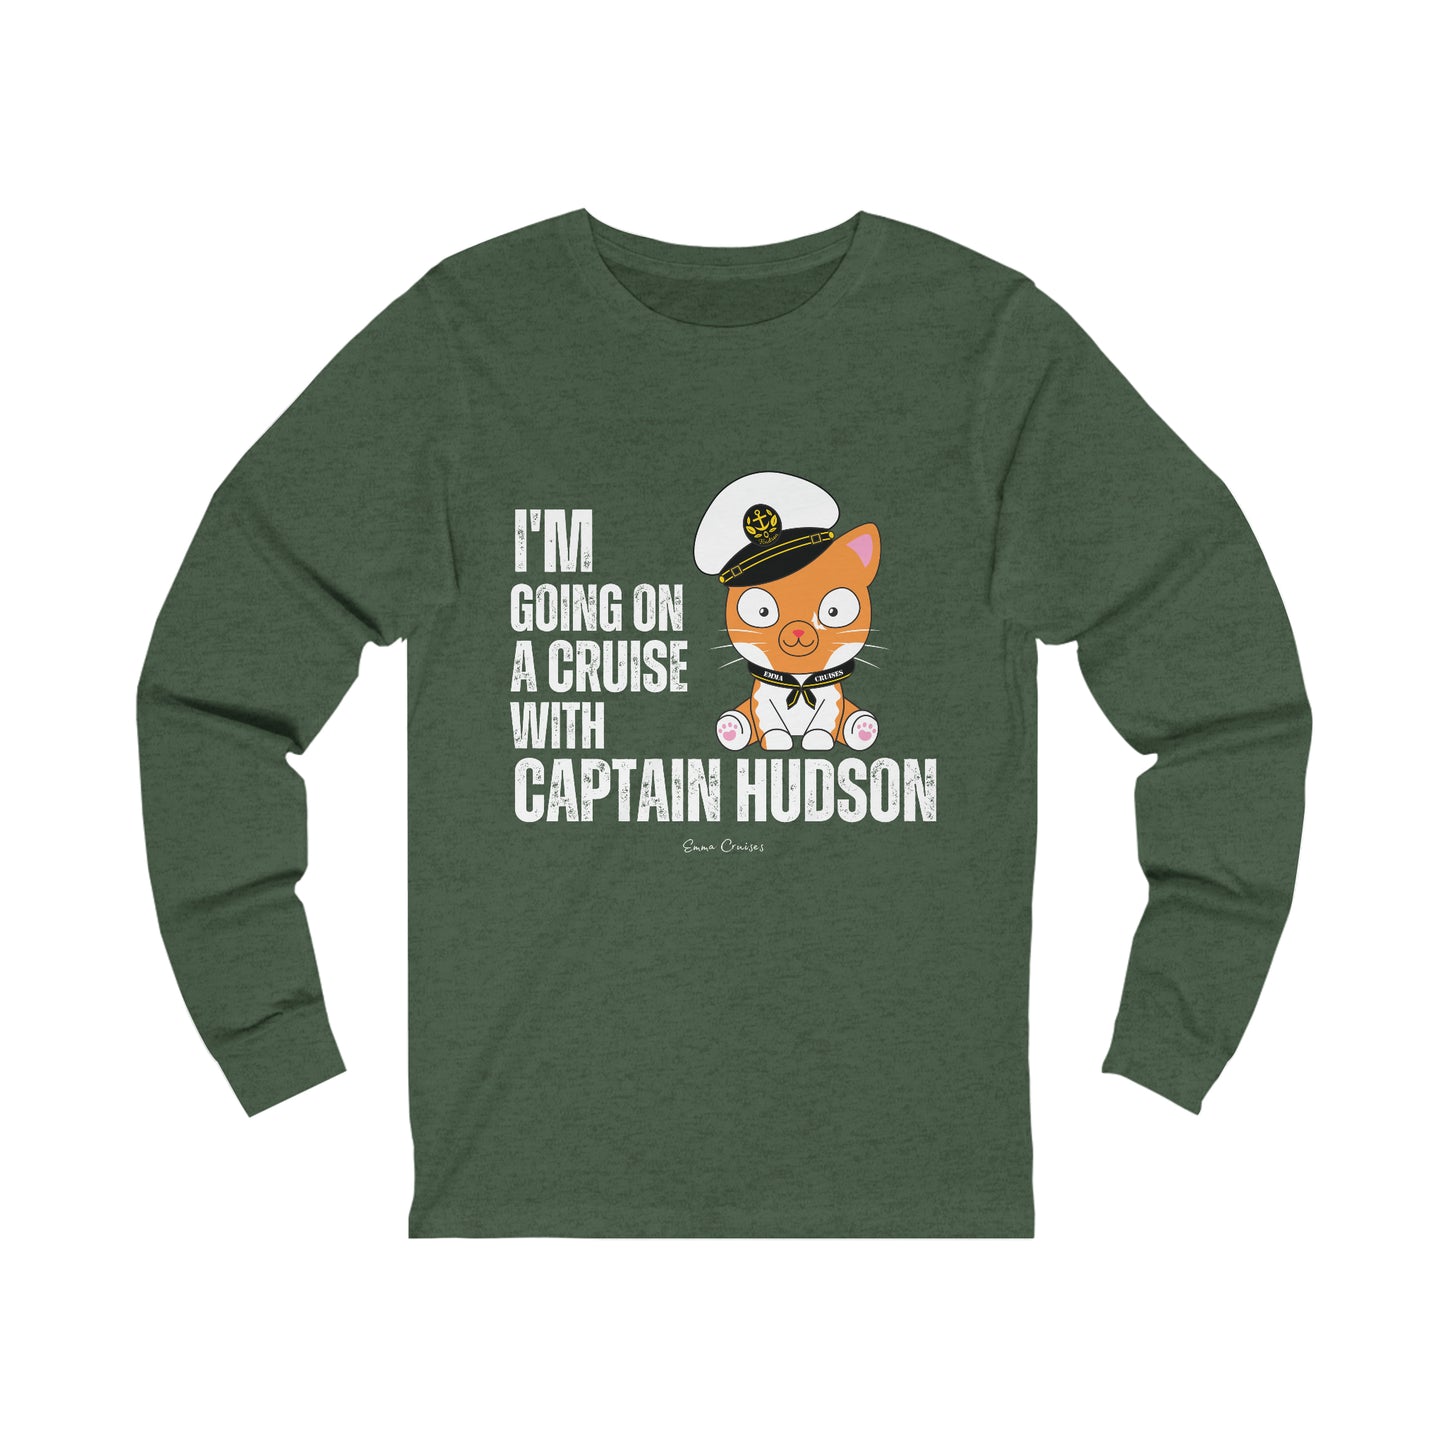 I’m Going on a Cruise With Captain Hudson - UNISEX T-Shirt